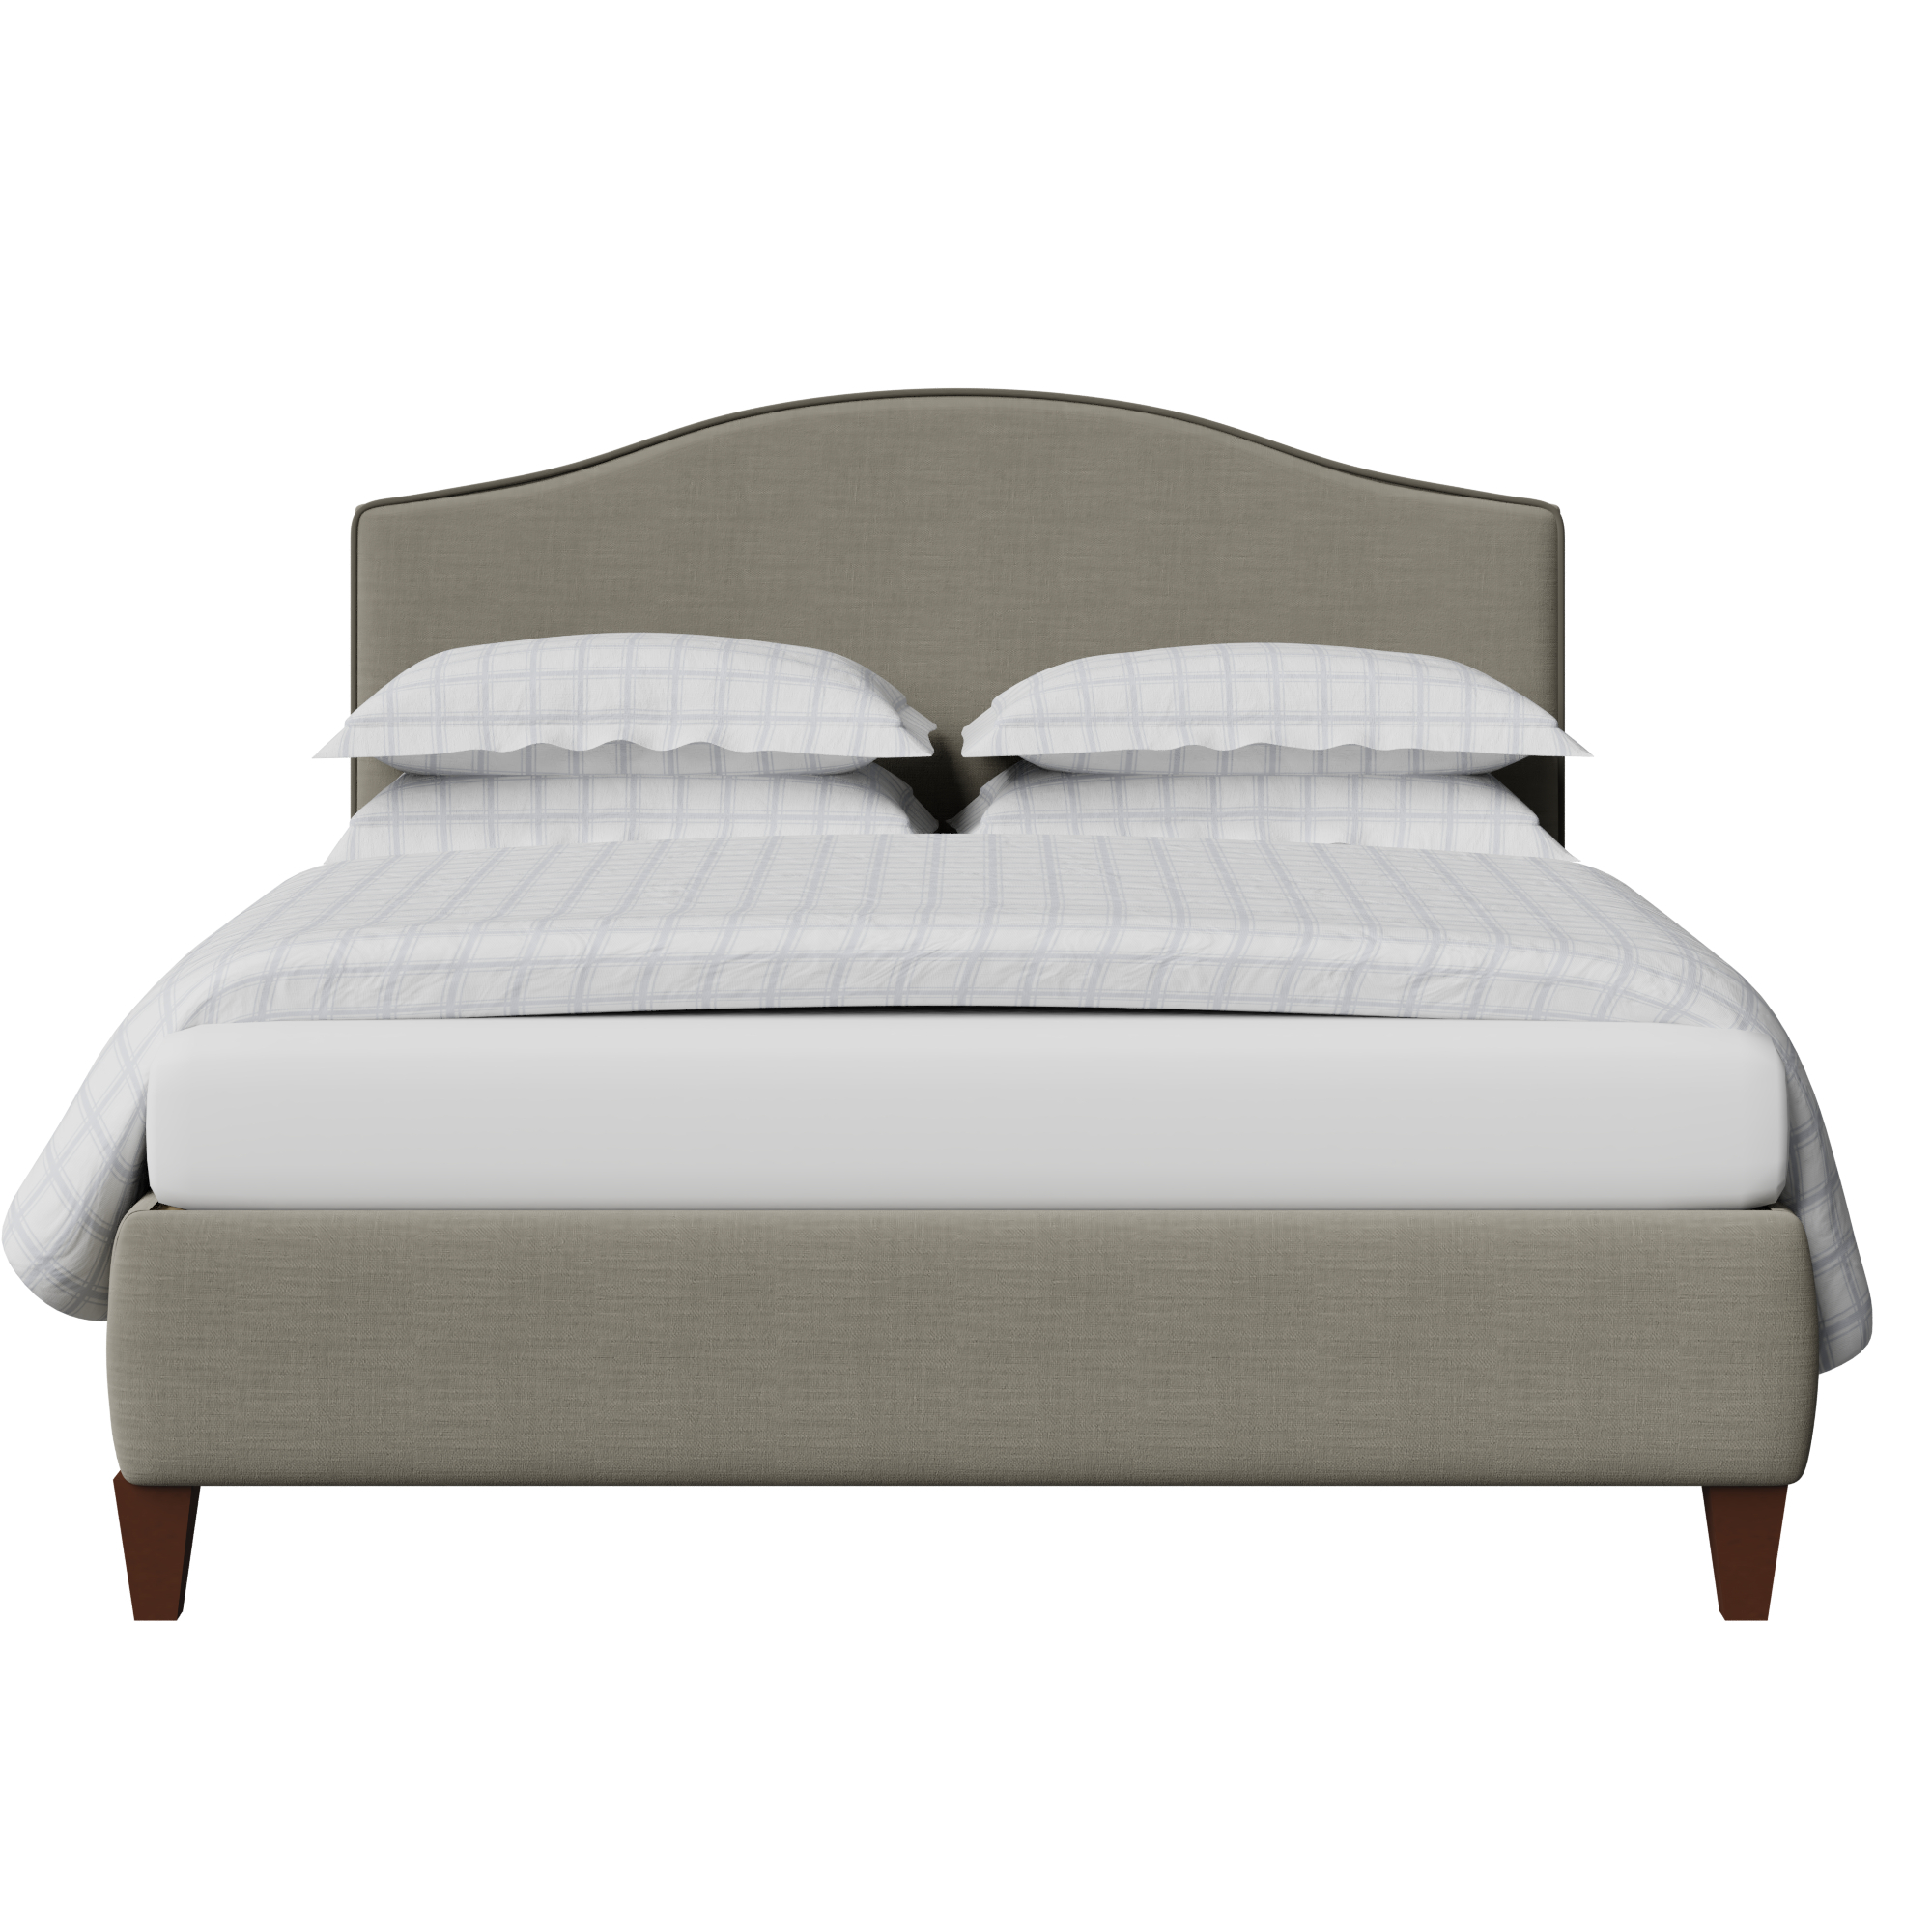 Daniella with Piping upholstered bed in grey fabric